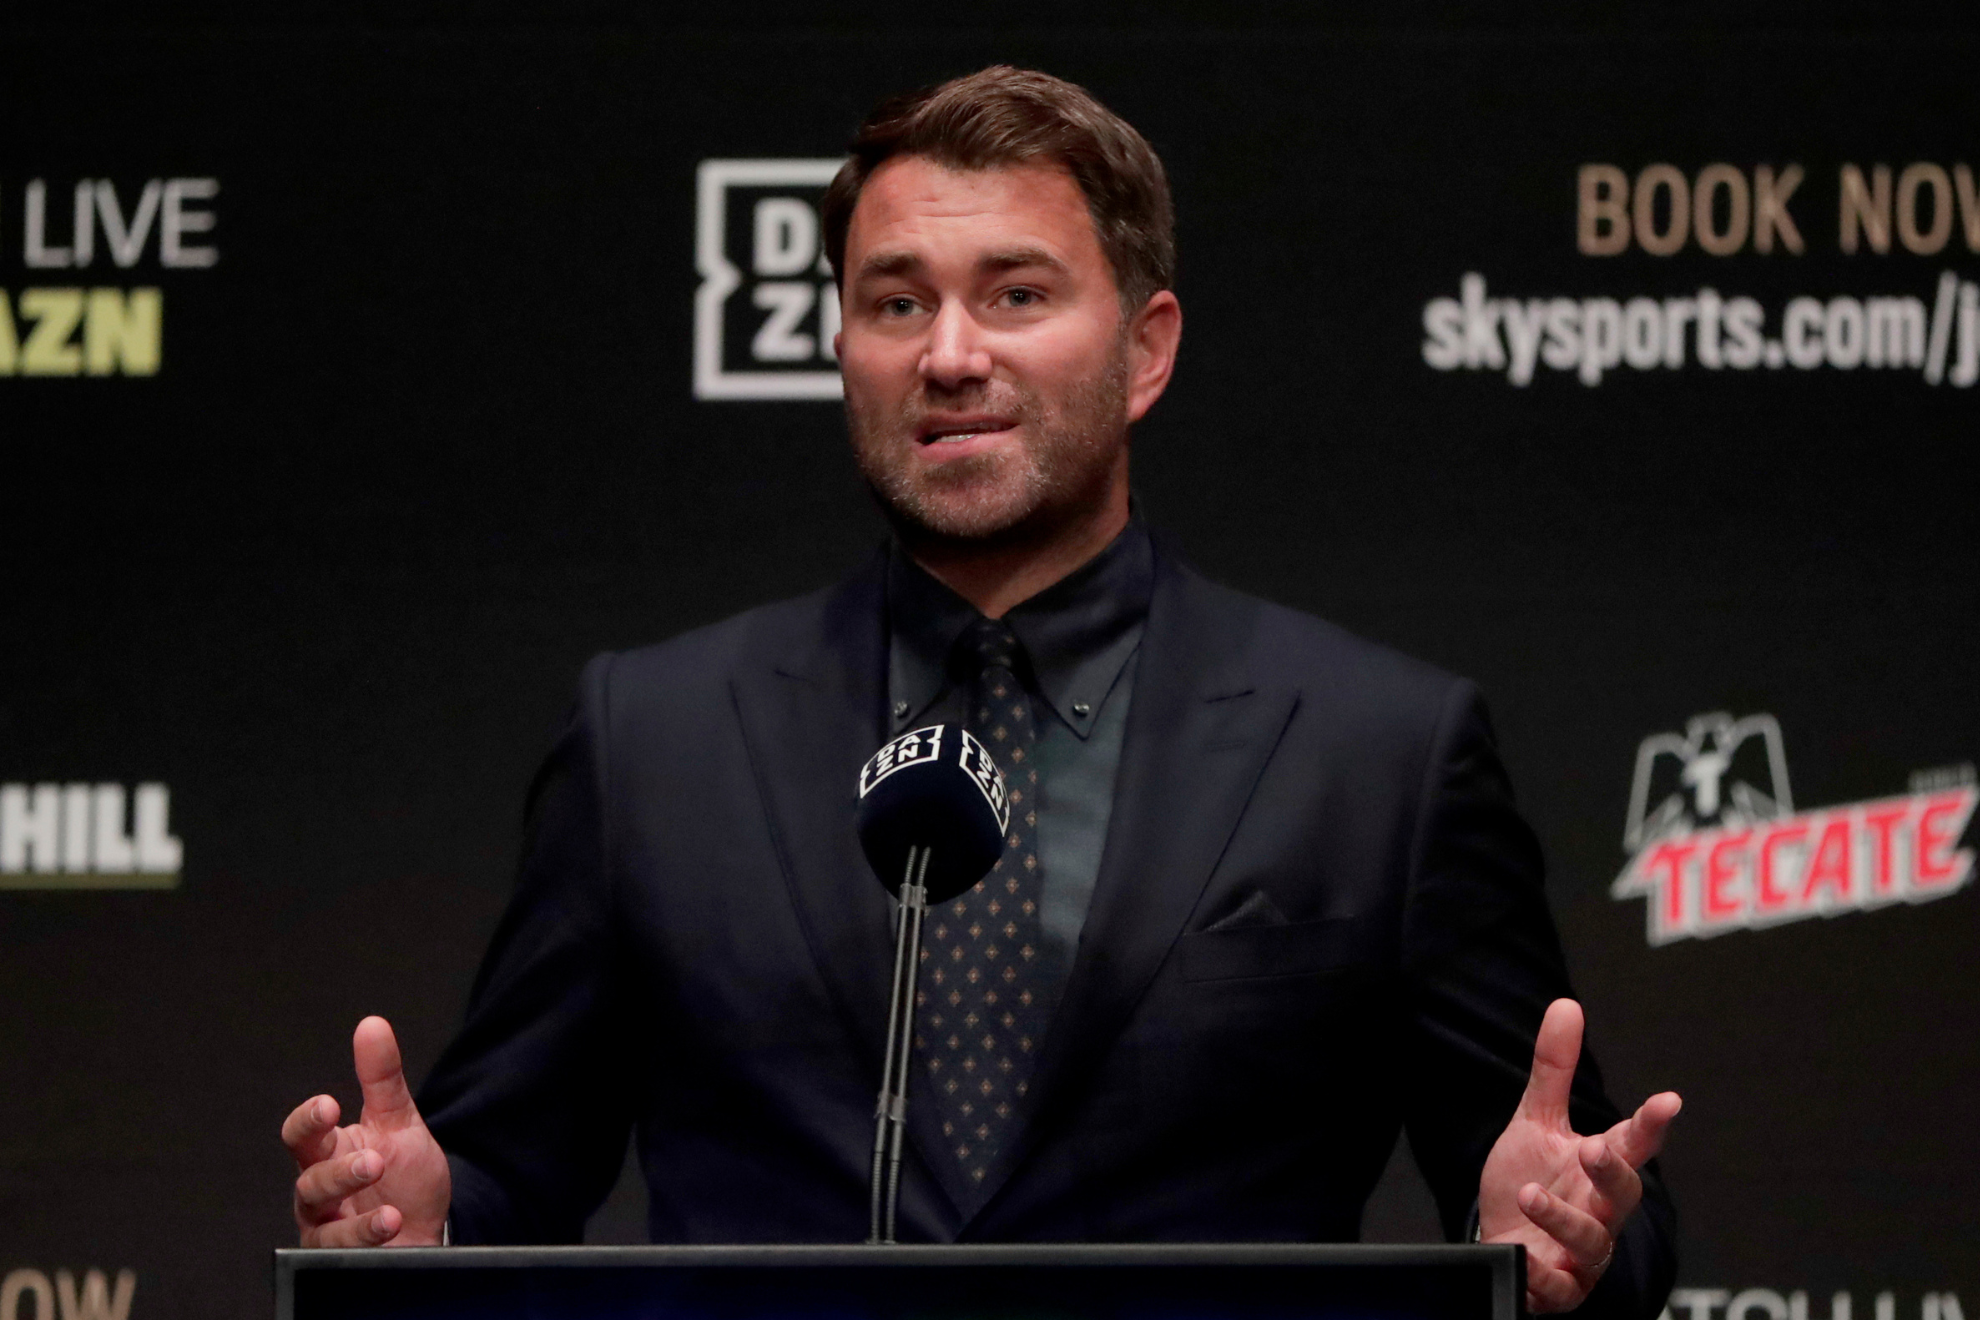 Eddie Hearn during a press conference.